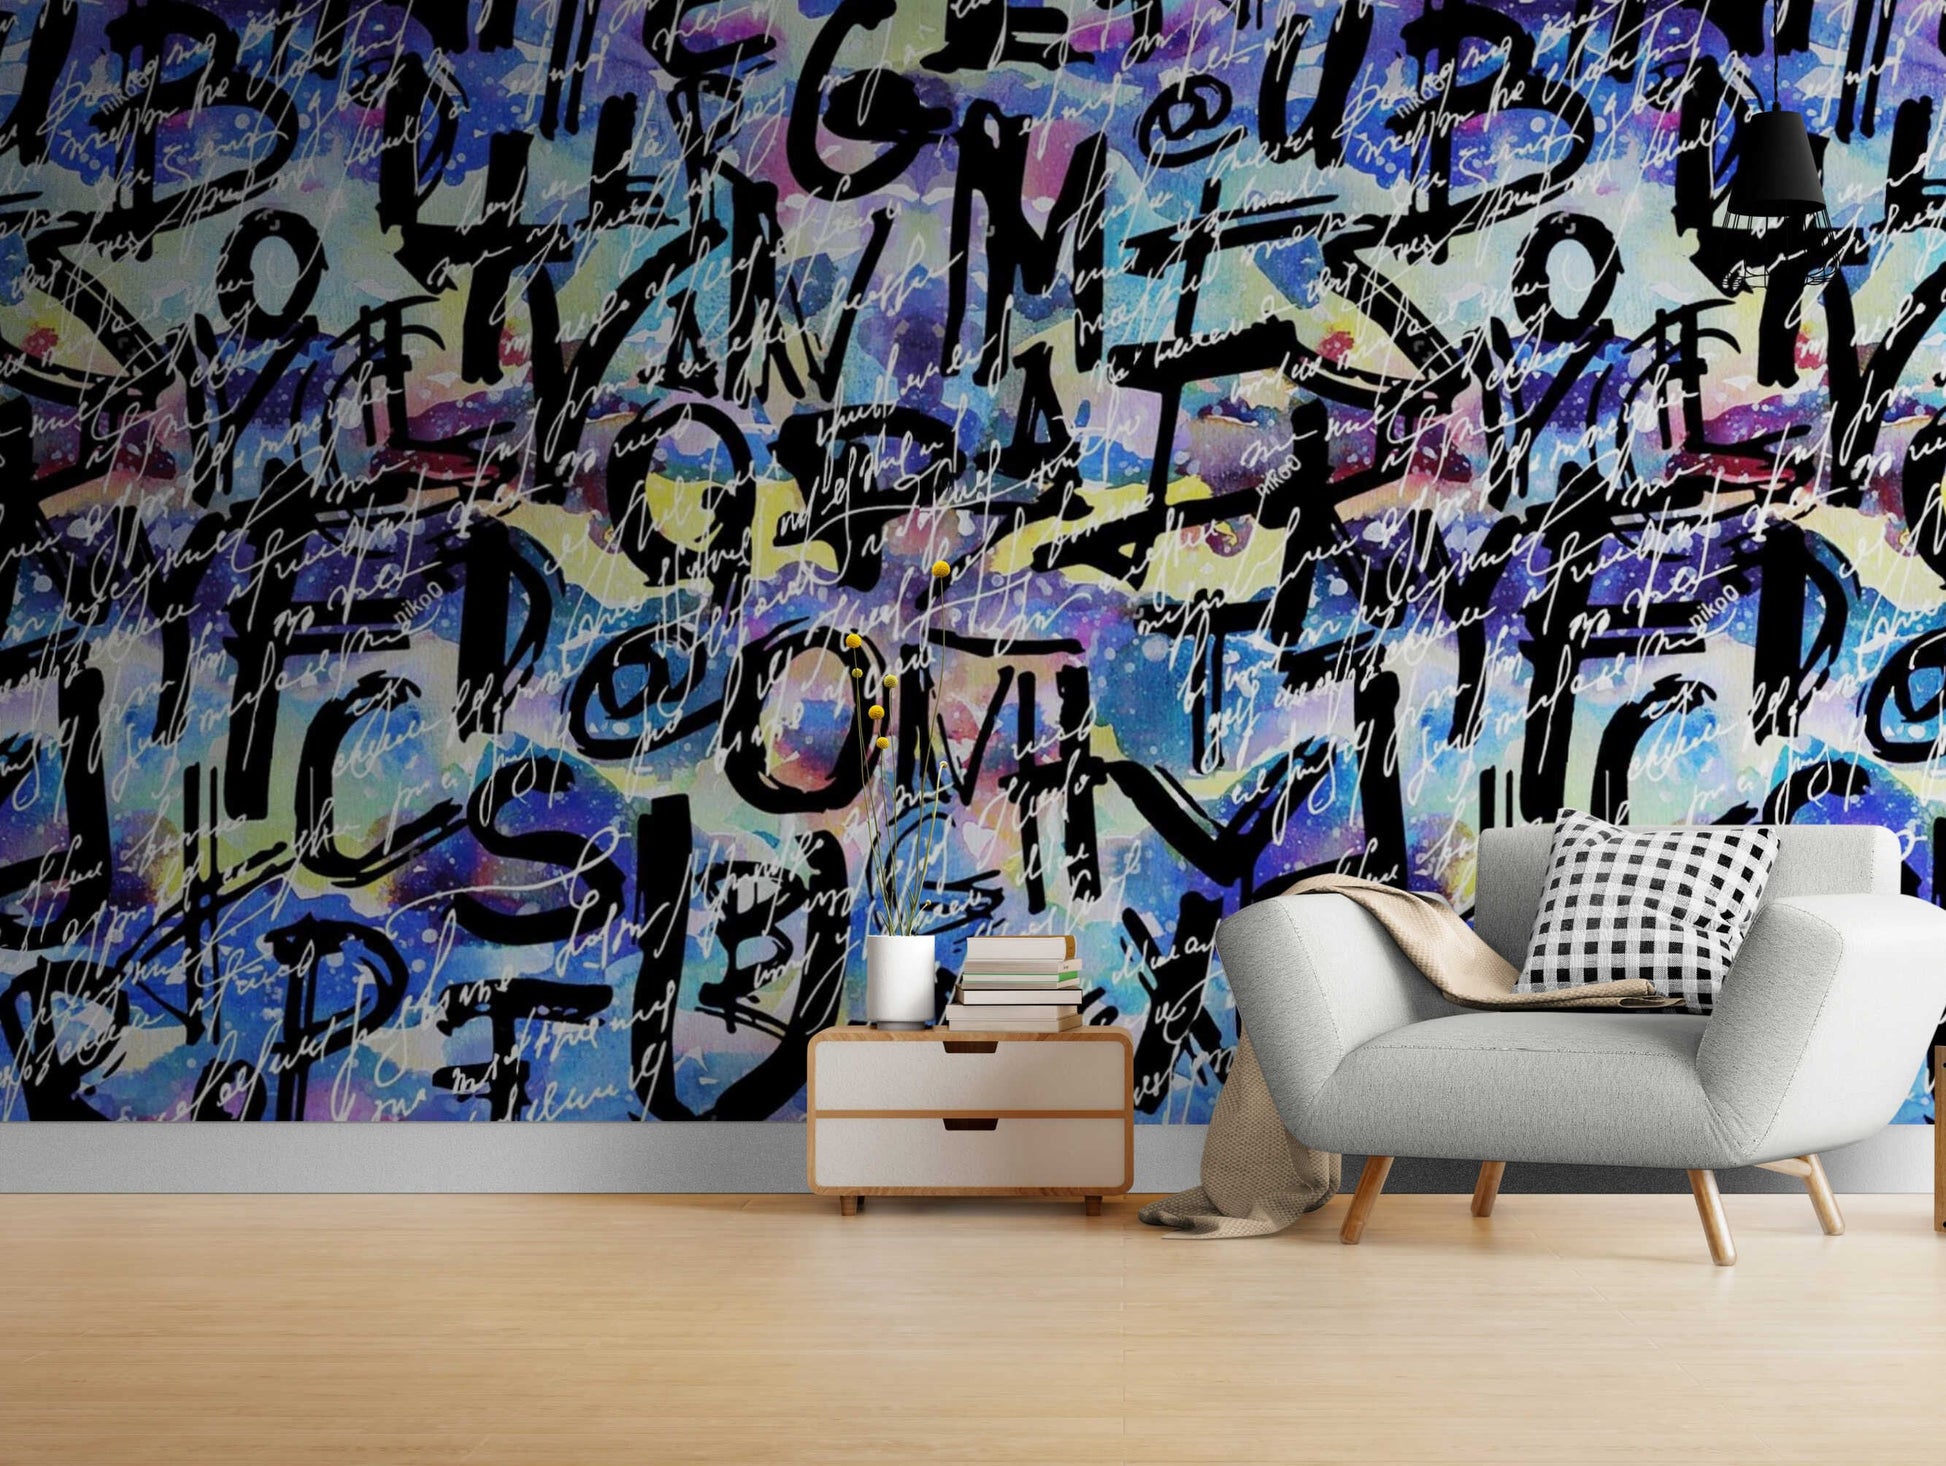 An image of a wallpaper with an abstract graffiti-inspired design in various colors, including shades of pink, blue, purple, and green. The design features irregular shapes and lines that create a chaotic yet artistic effect. The wallpaper is self-adhesive, making it easy to install without the need for additional glue or paste.